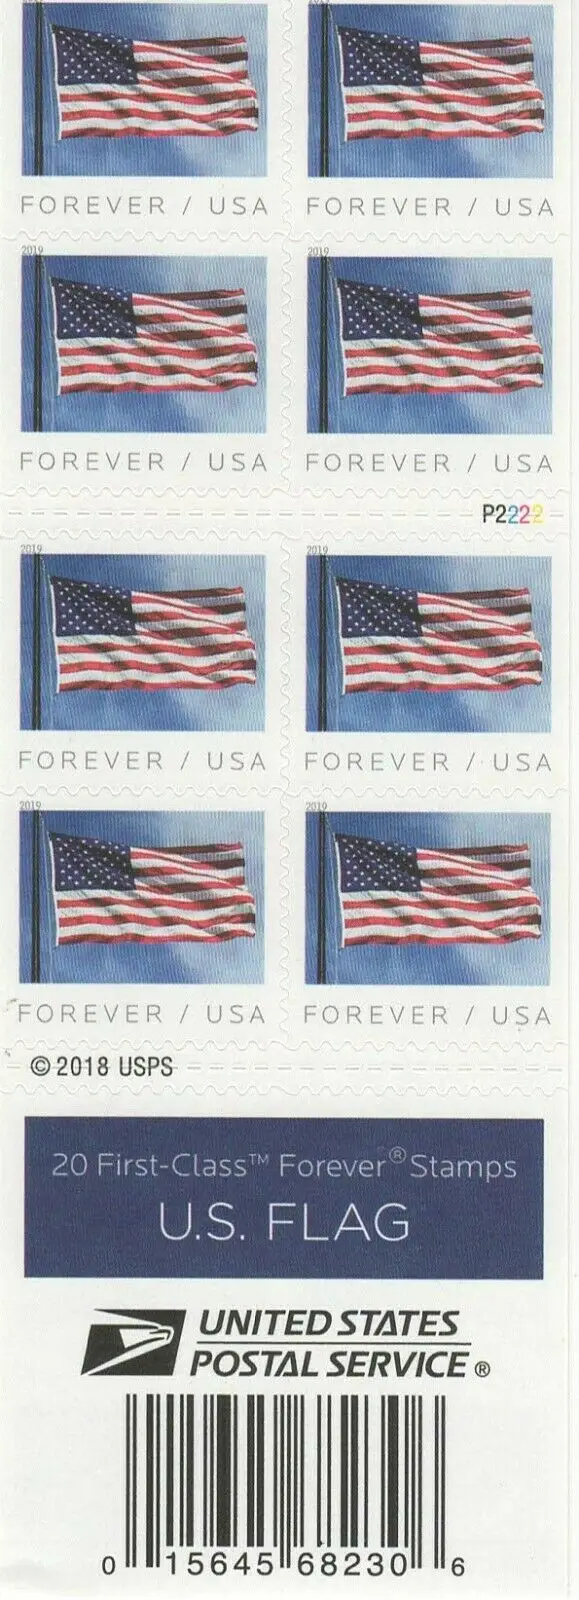 

2019 US Flag 4 Books of 20 USPS Forever First Class Postage Stamps Patriotic American Celebration (80 Stamps)